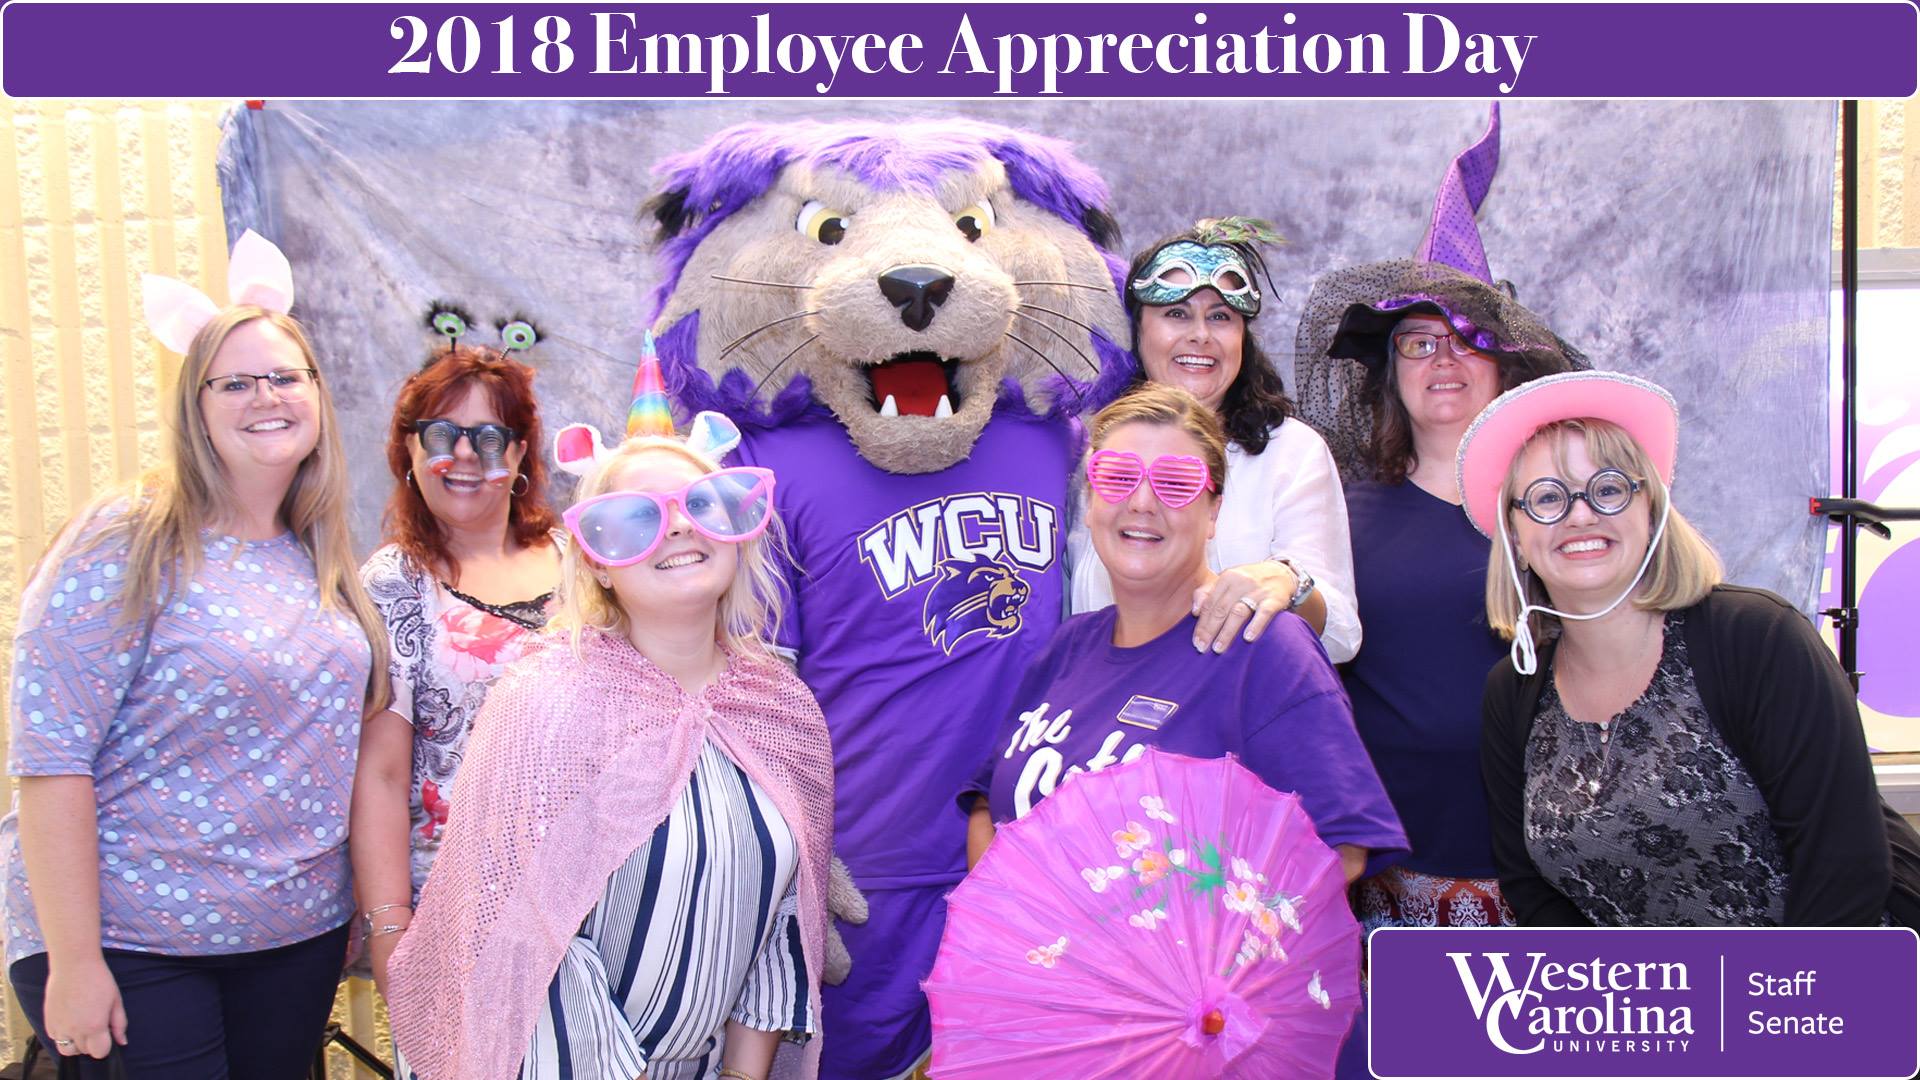 WCU staff members join Cats in taking a silly photo at Employee Appreciation Day.